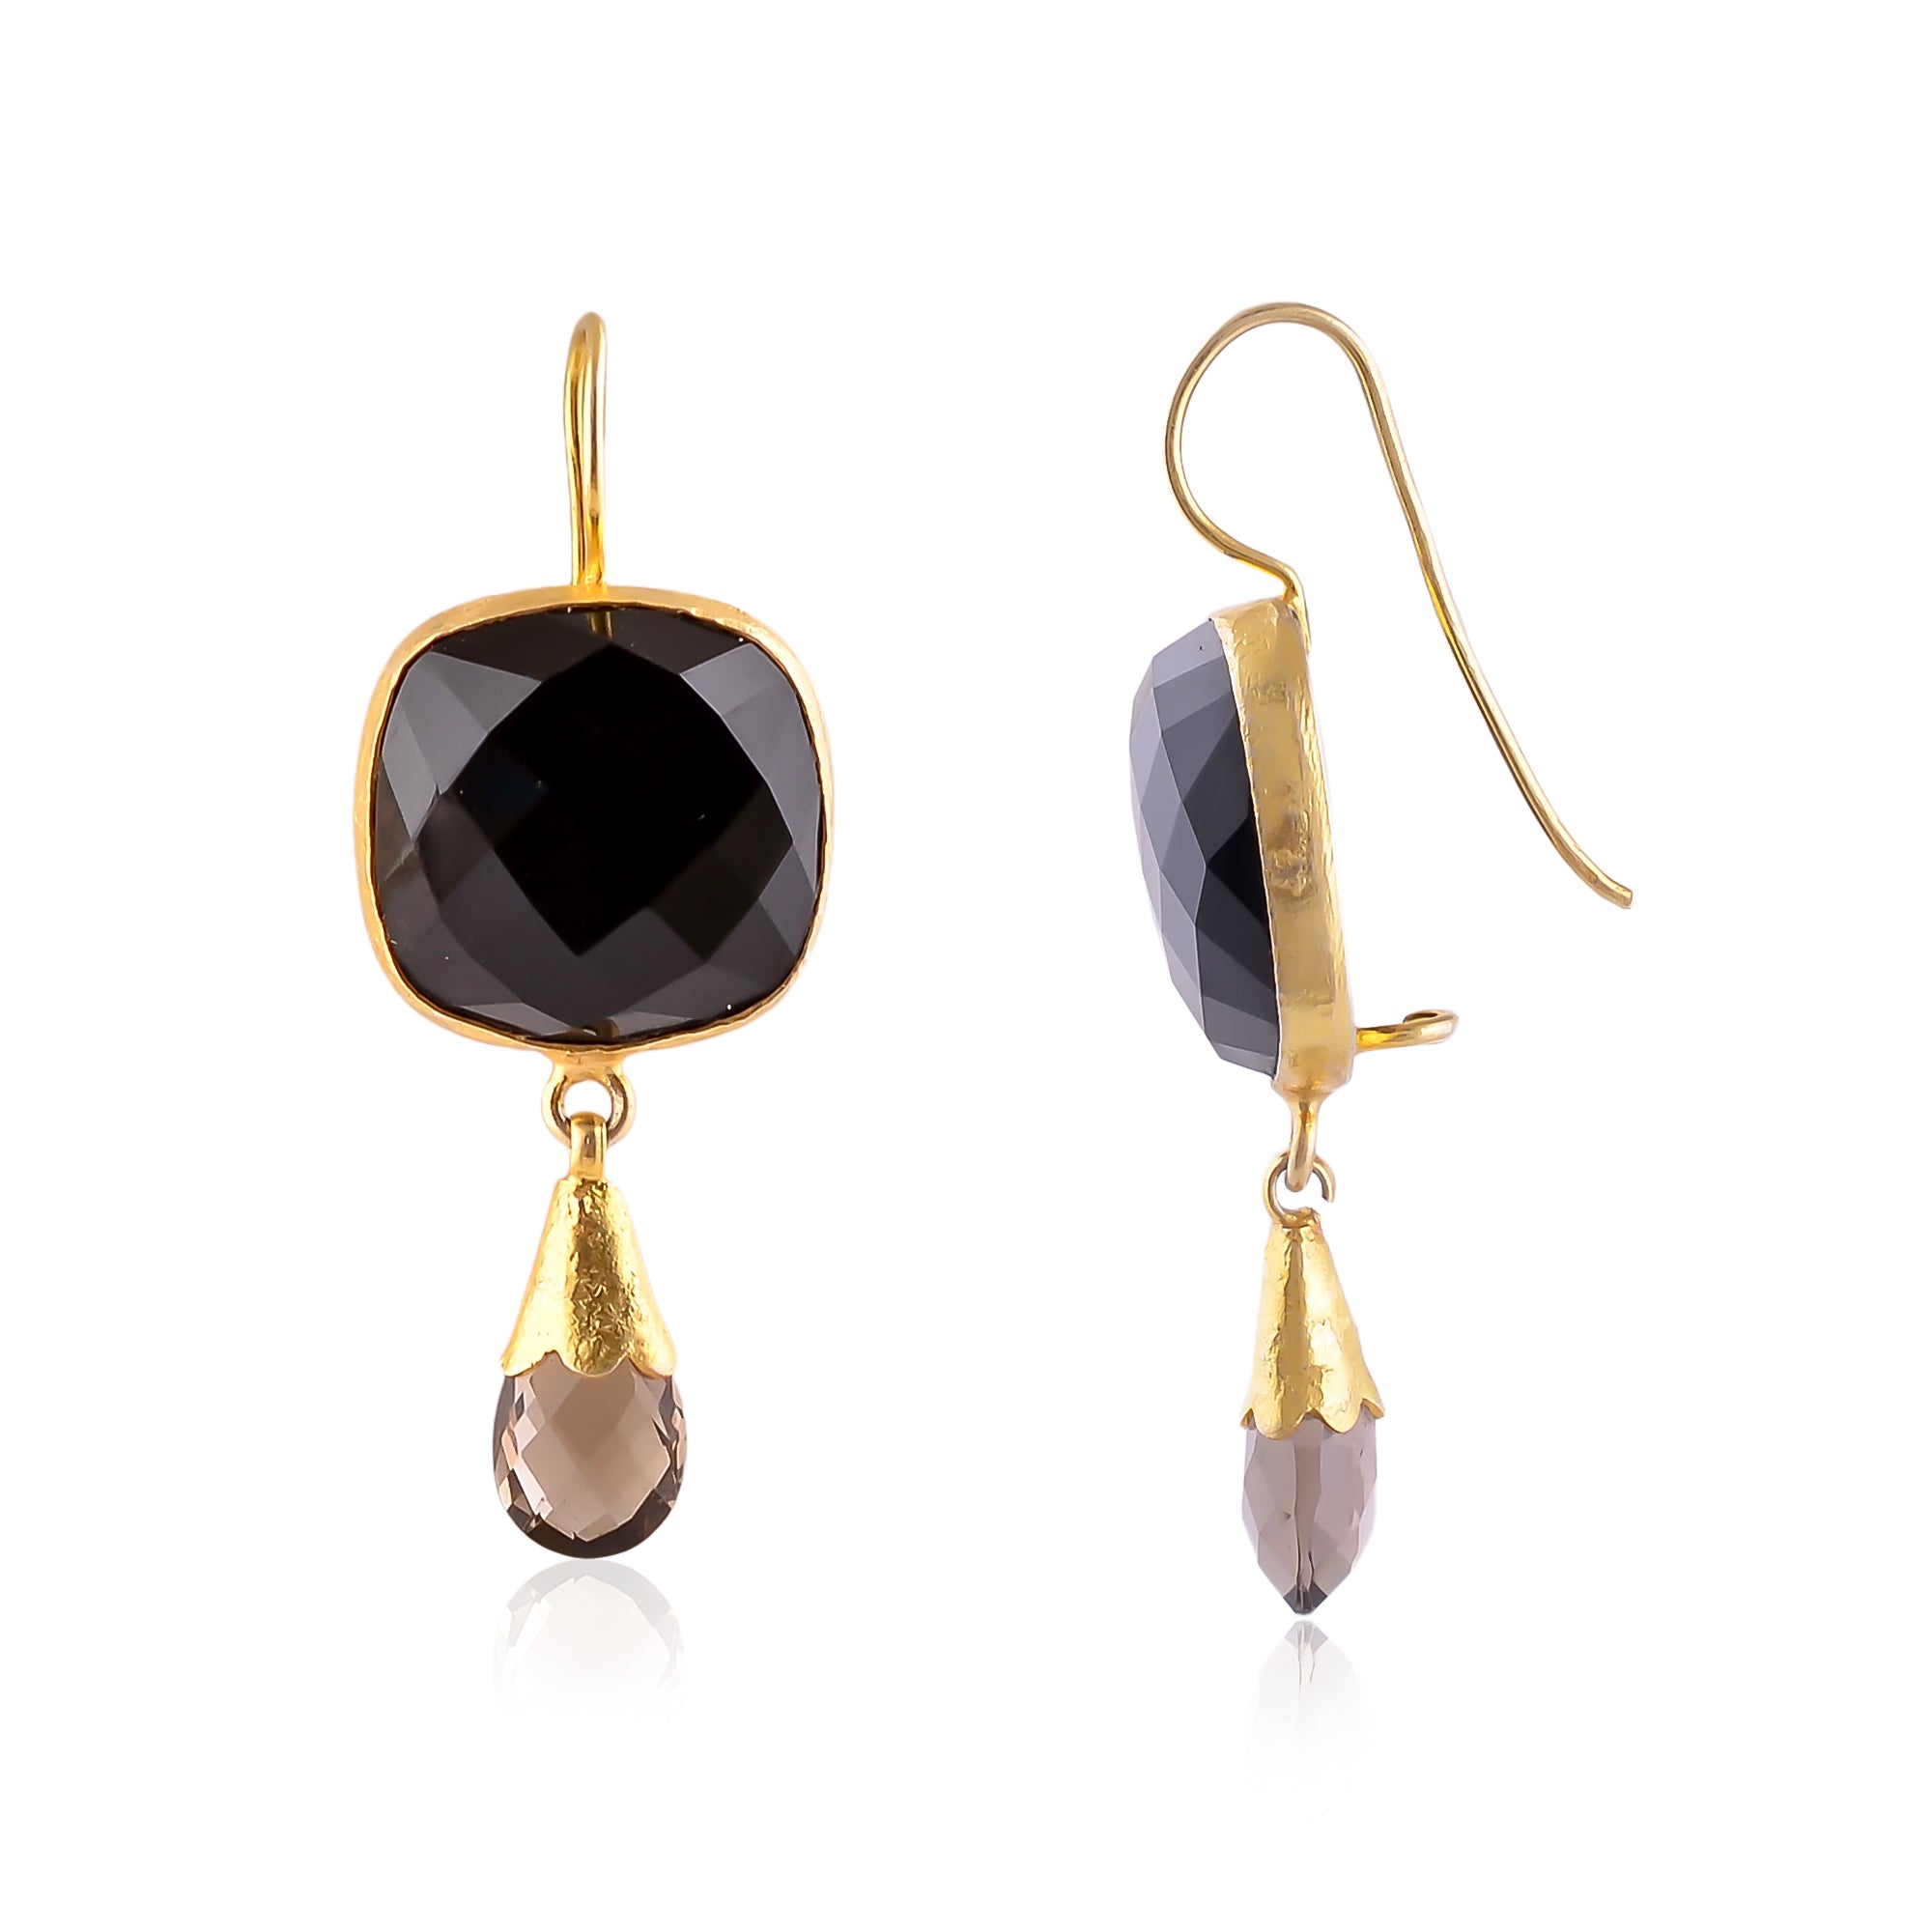 Buy Indian Hand Crafted Silver Gold Plated Black Onyx/smoky Drop Earring